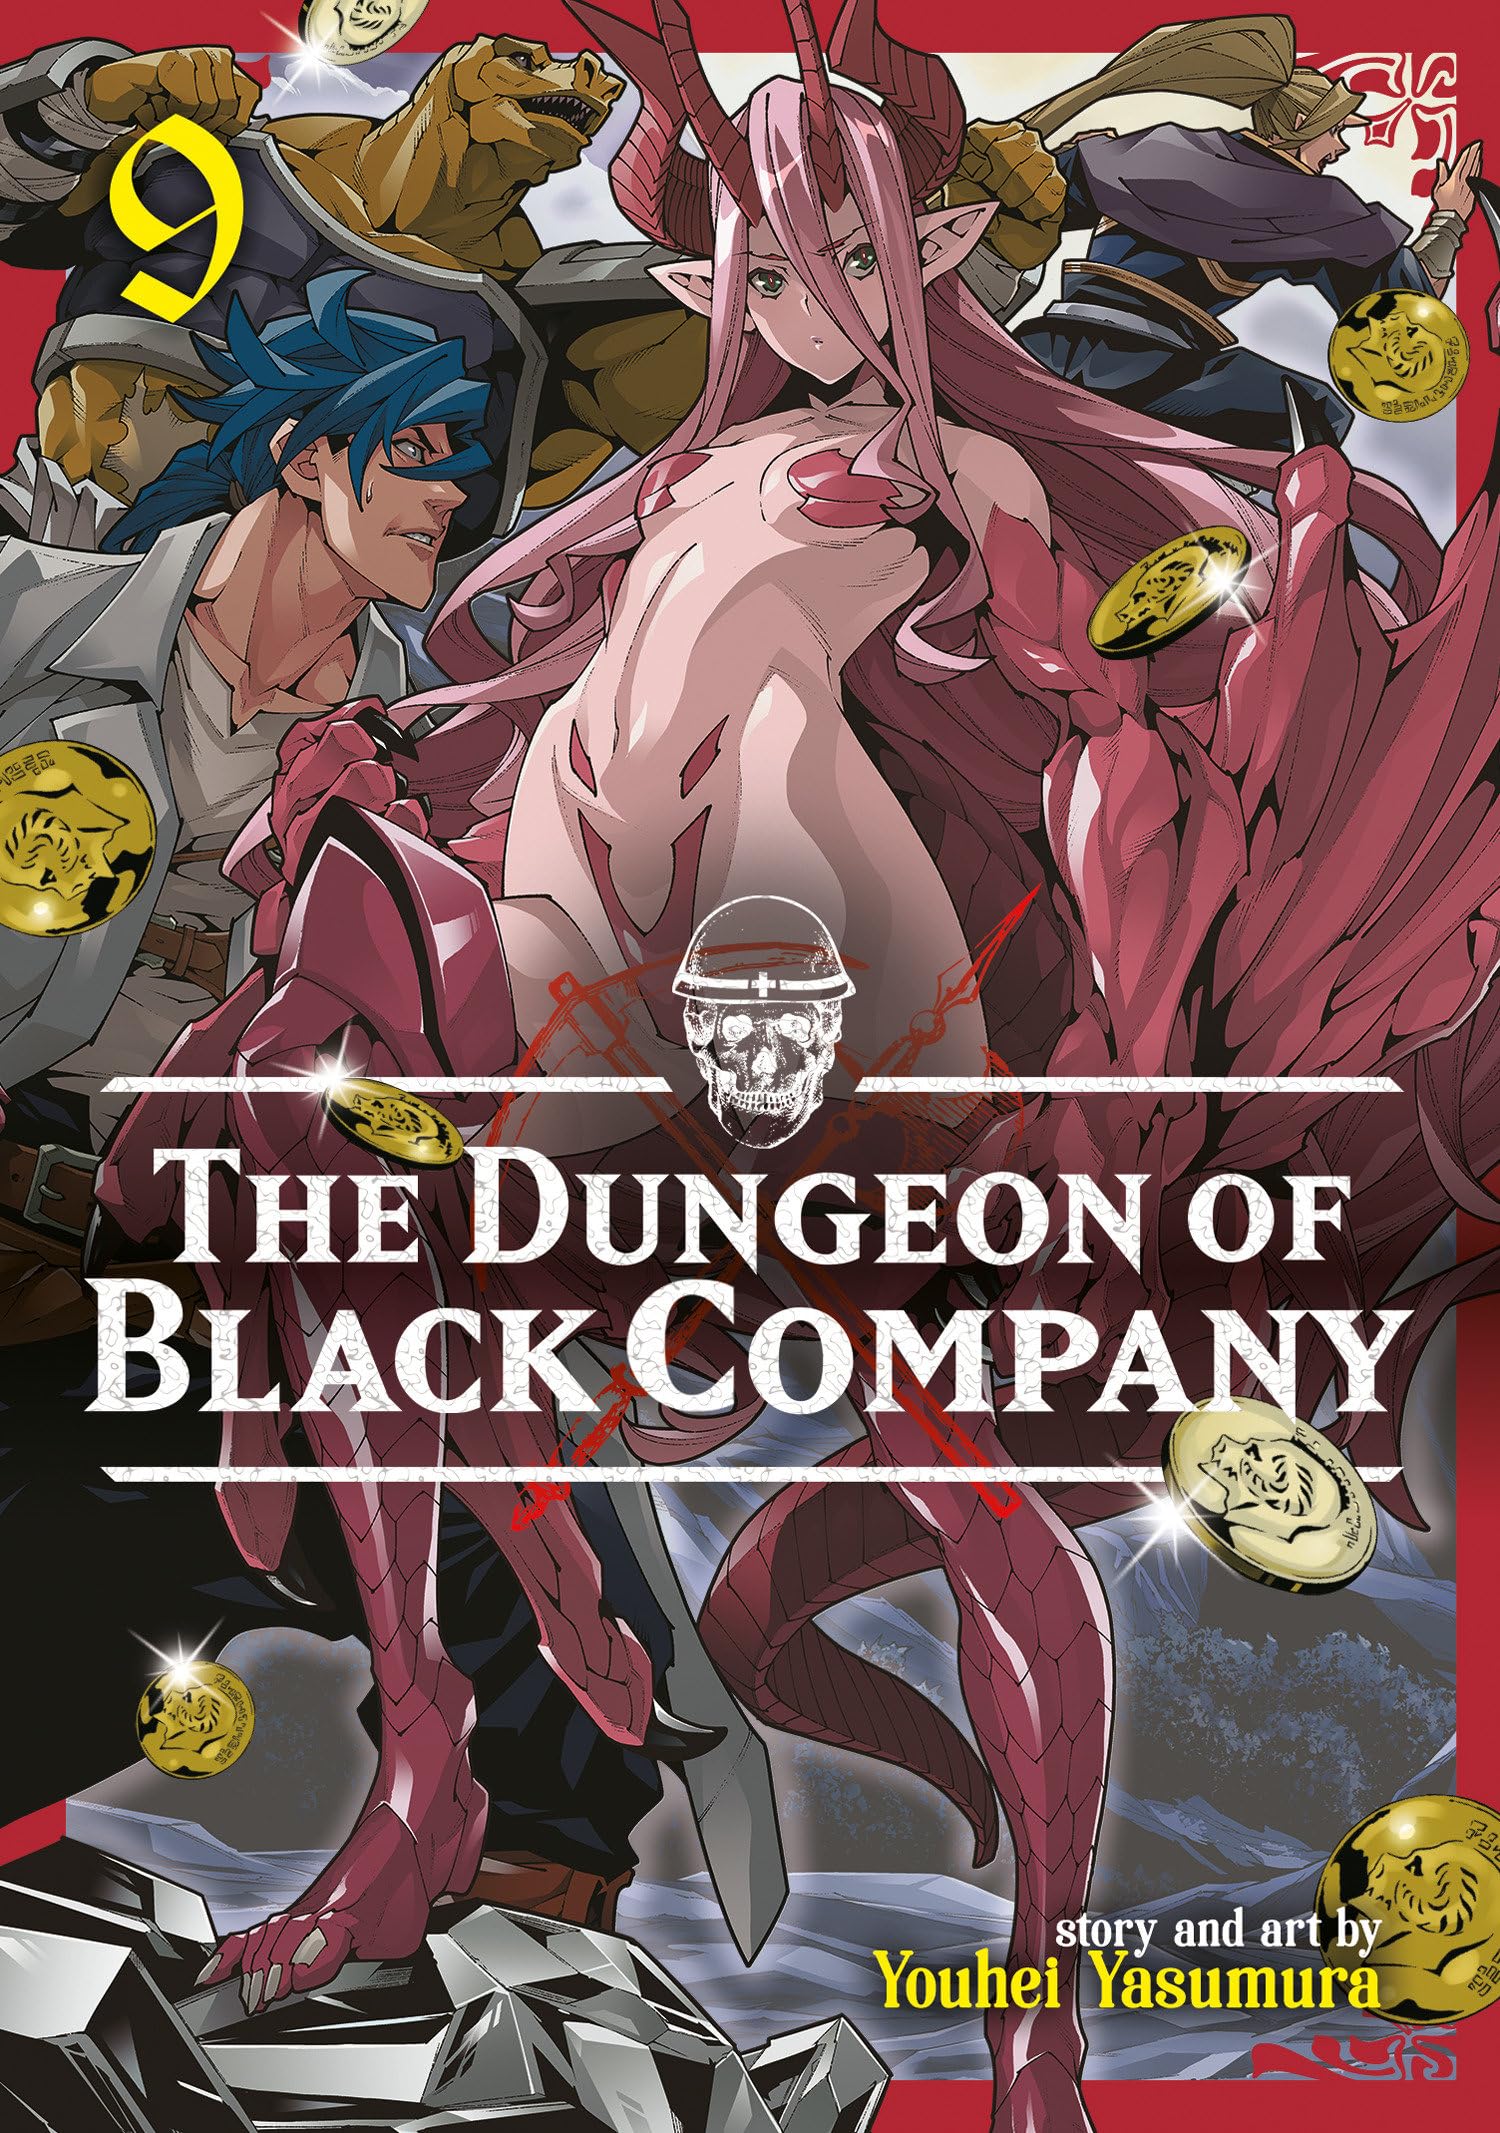 The Dungeon of Black Company Vol. 09